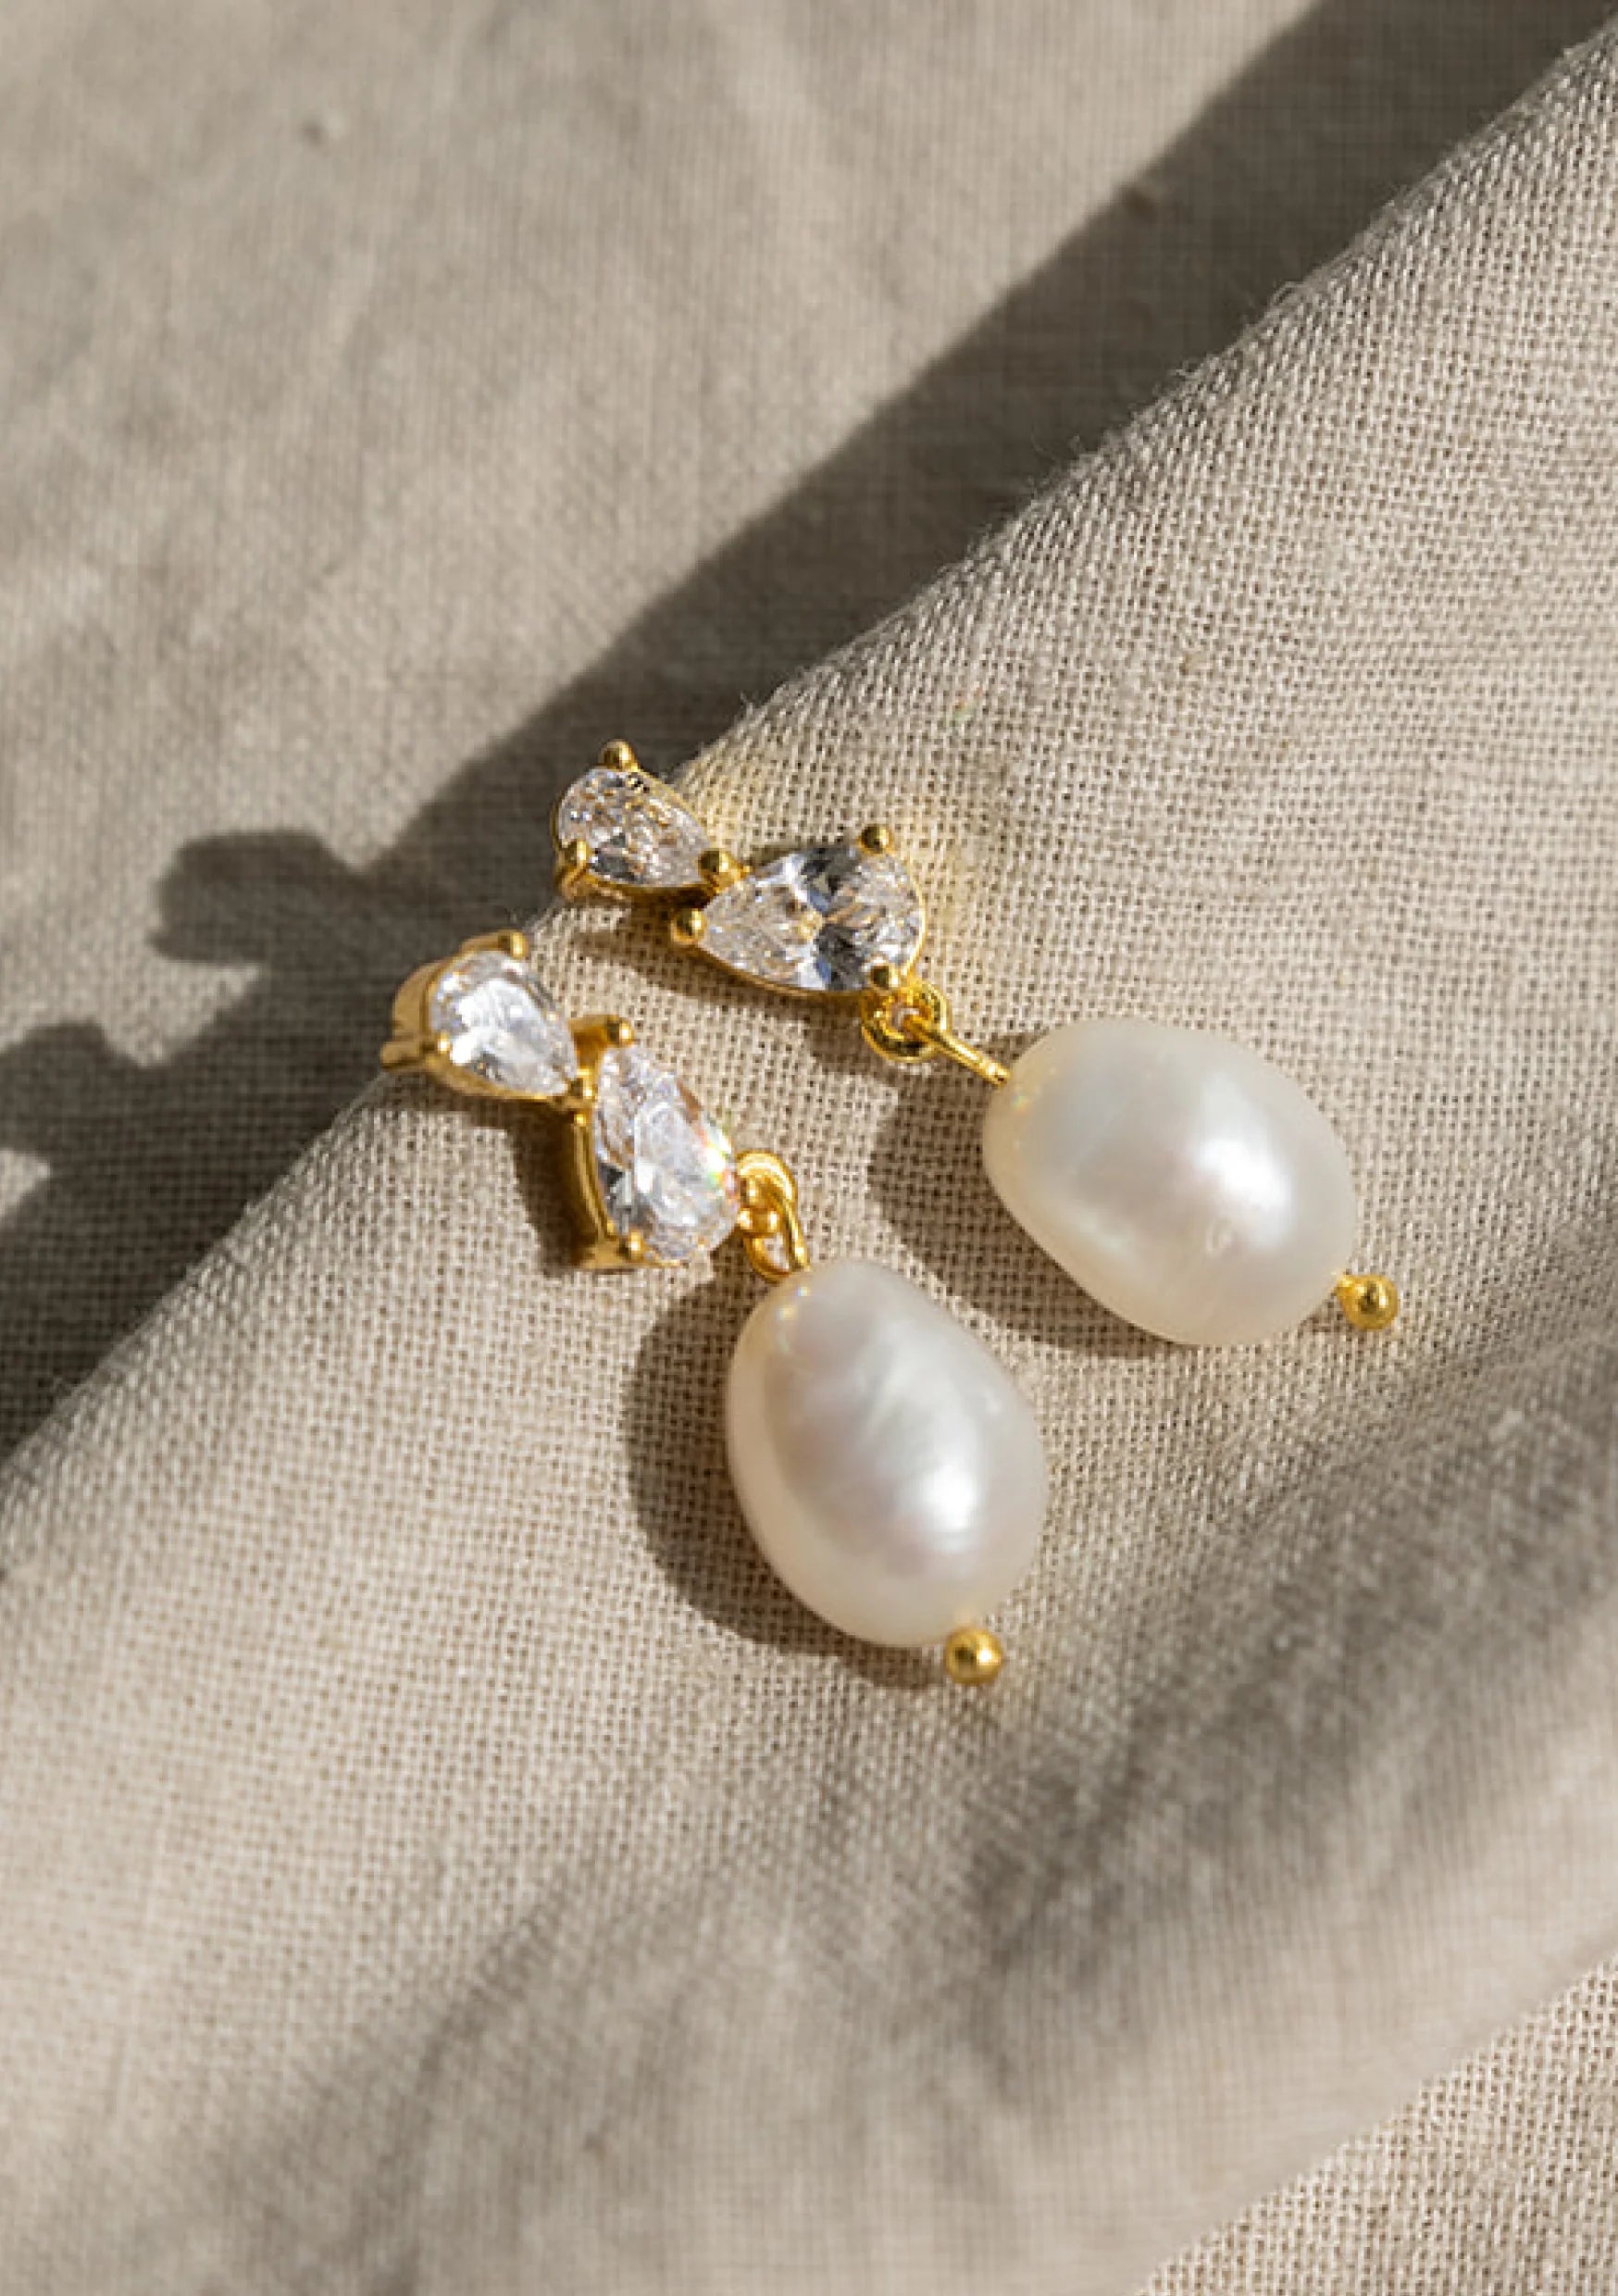 Lola Knight - Ines - Pear-Shaped Crystal and Pearl Earrings - 18K Gold